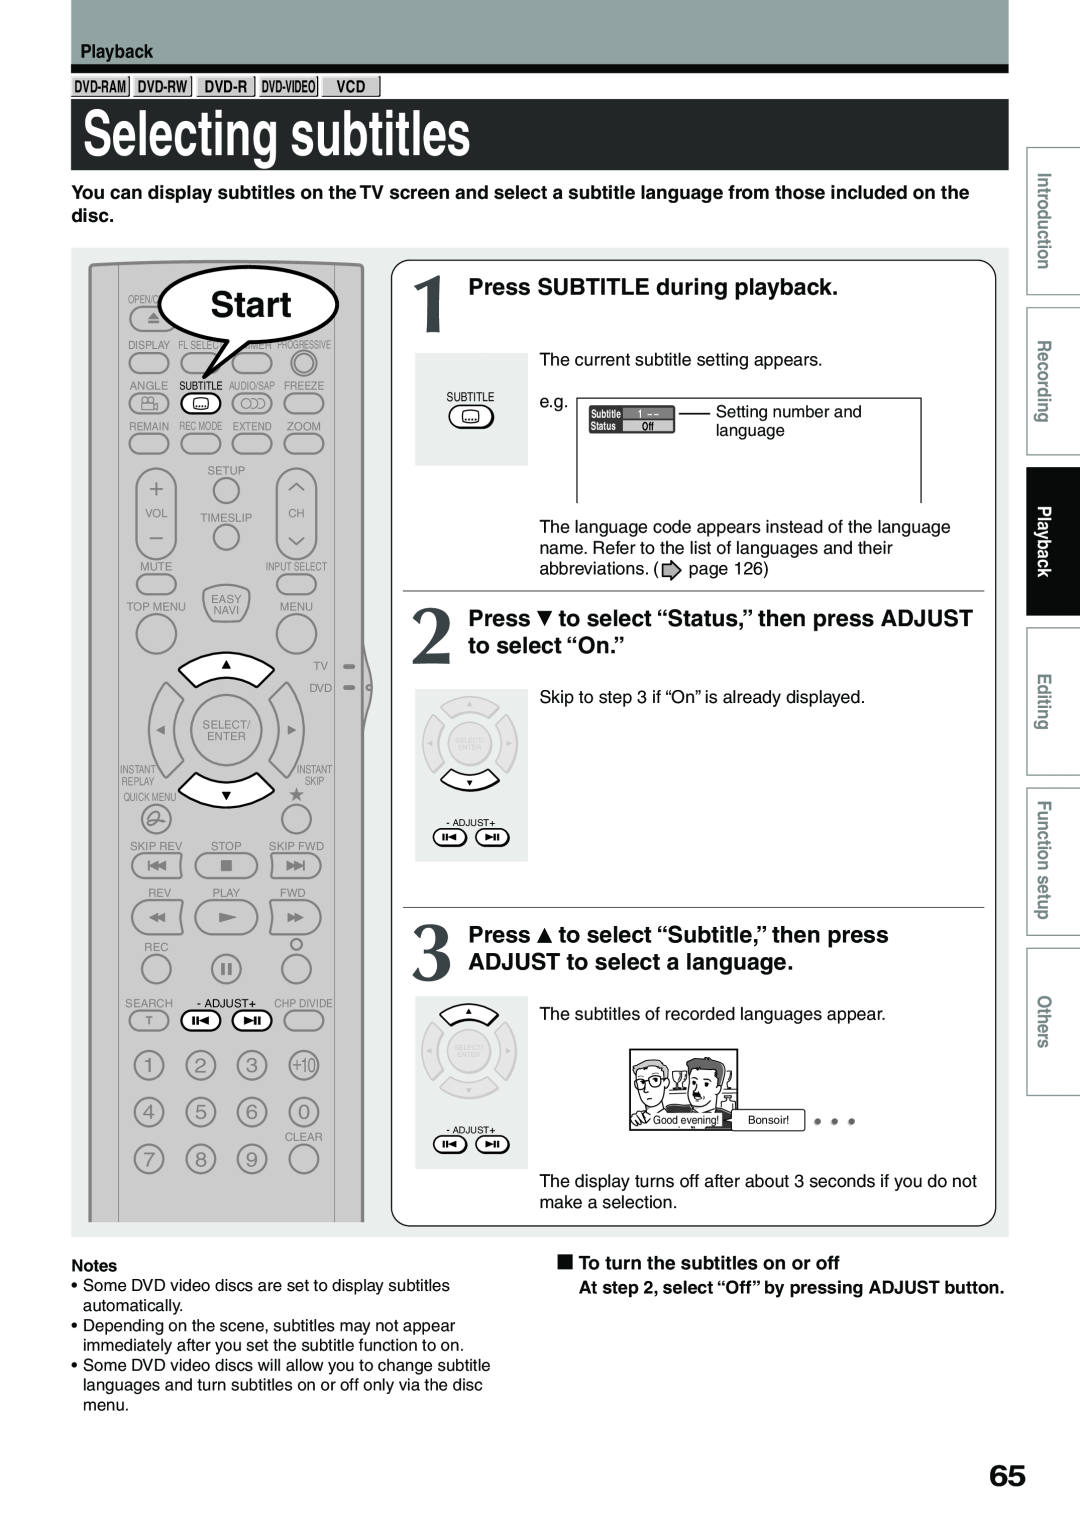 Toshiba D-R4SC, D-KR4SU, D-R4SU owner manual Selecting subtitles, Press SUBTITLE during playback 